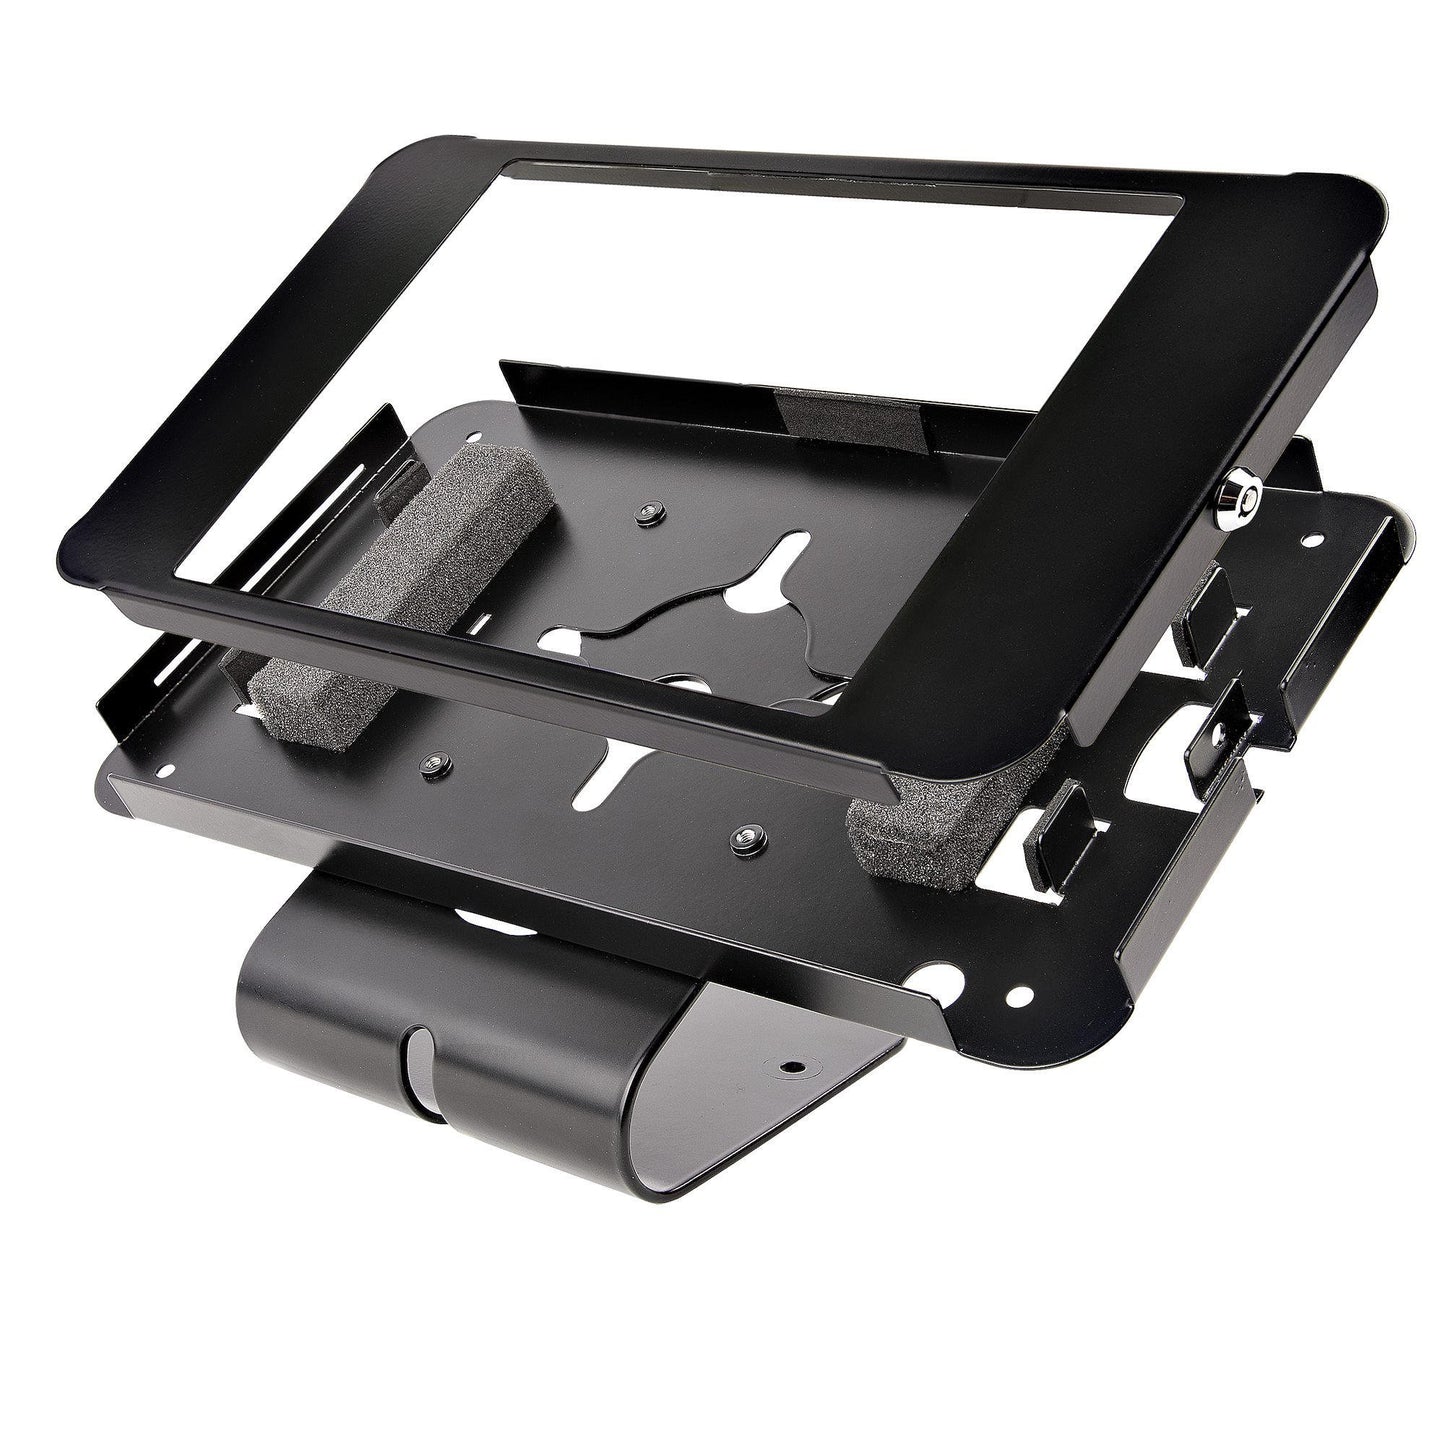 StarTech.com Secure Tablet Stand Up To 26.7cm